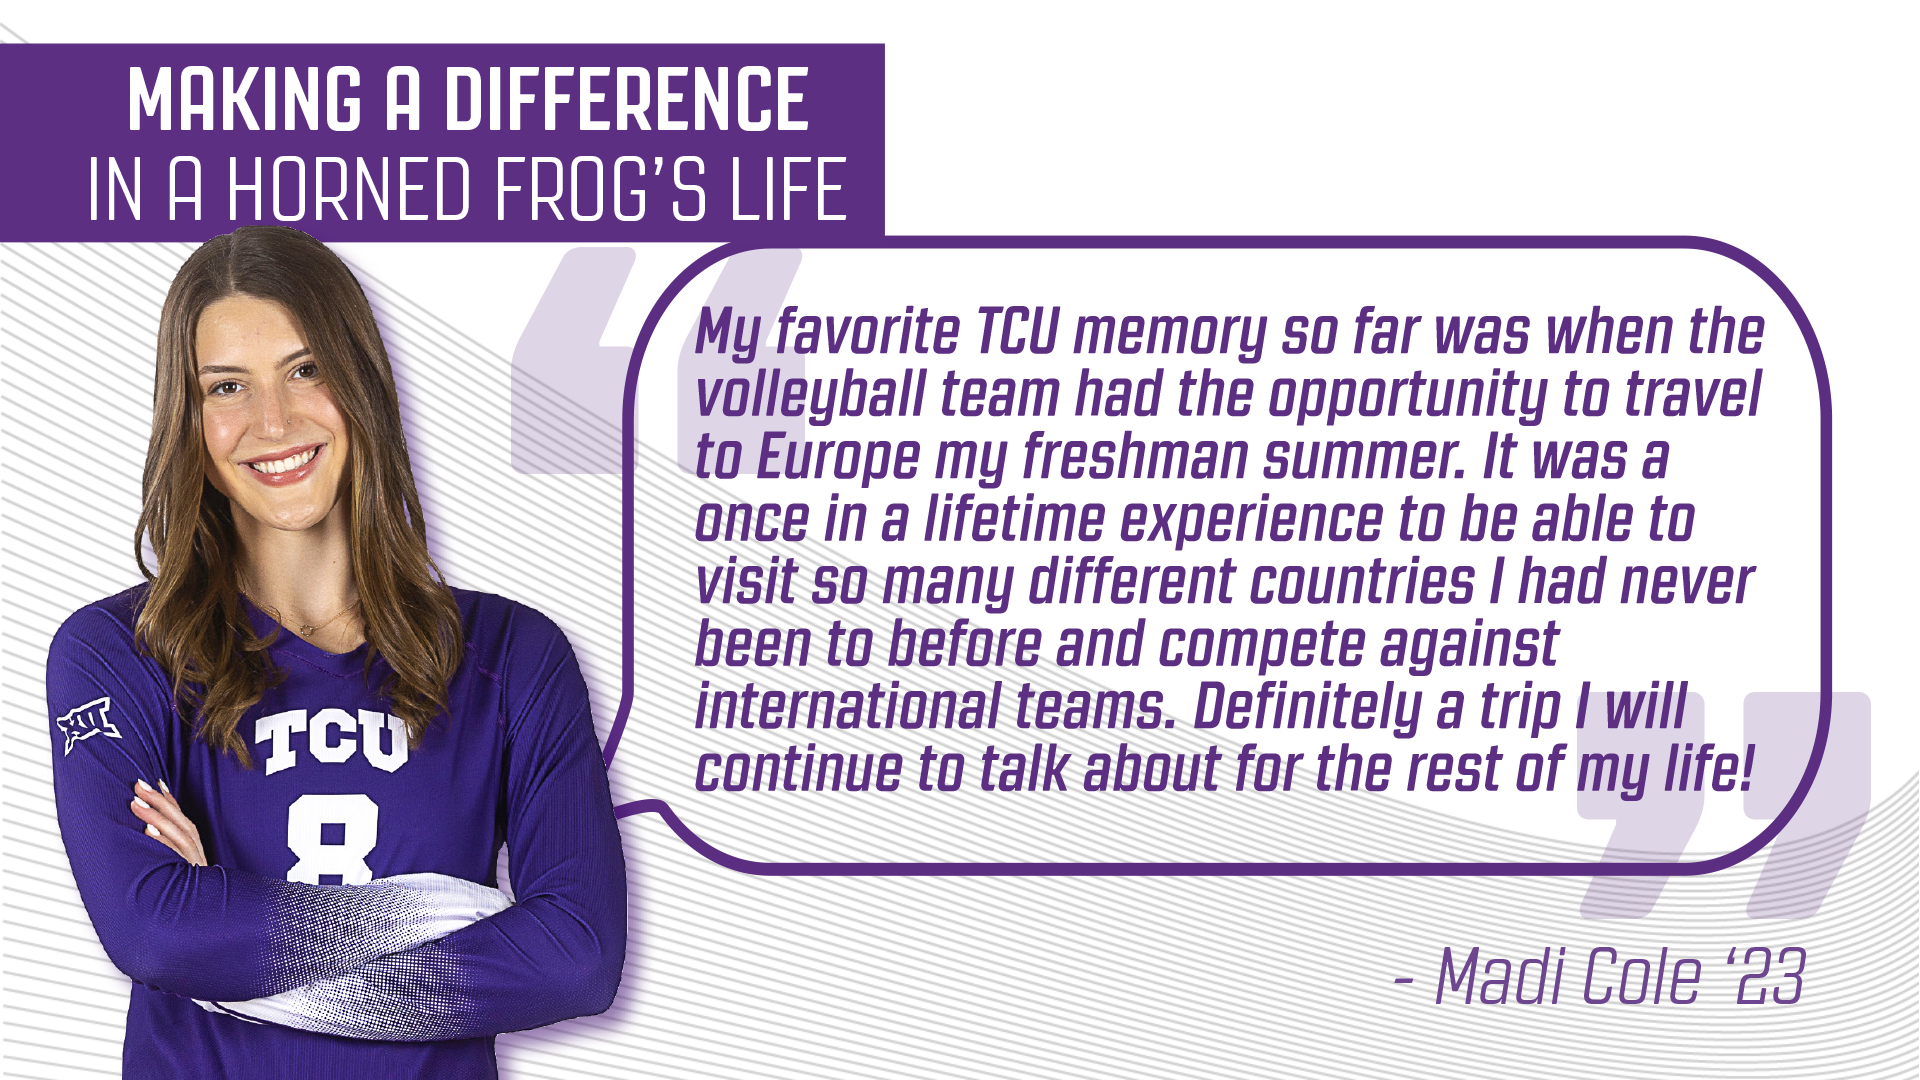 Making a Difference in a Horned Frog's Life